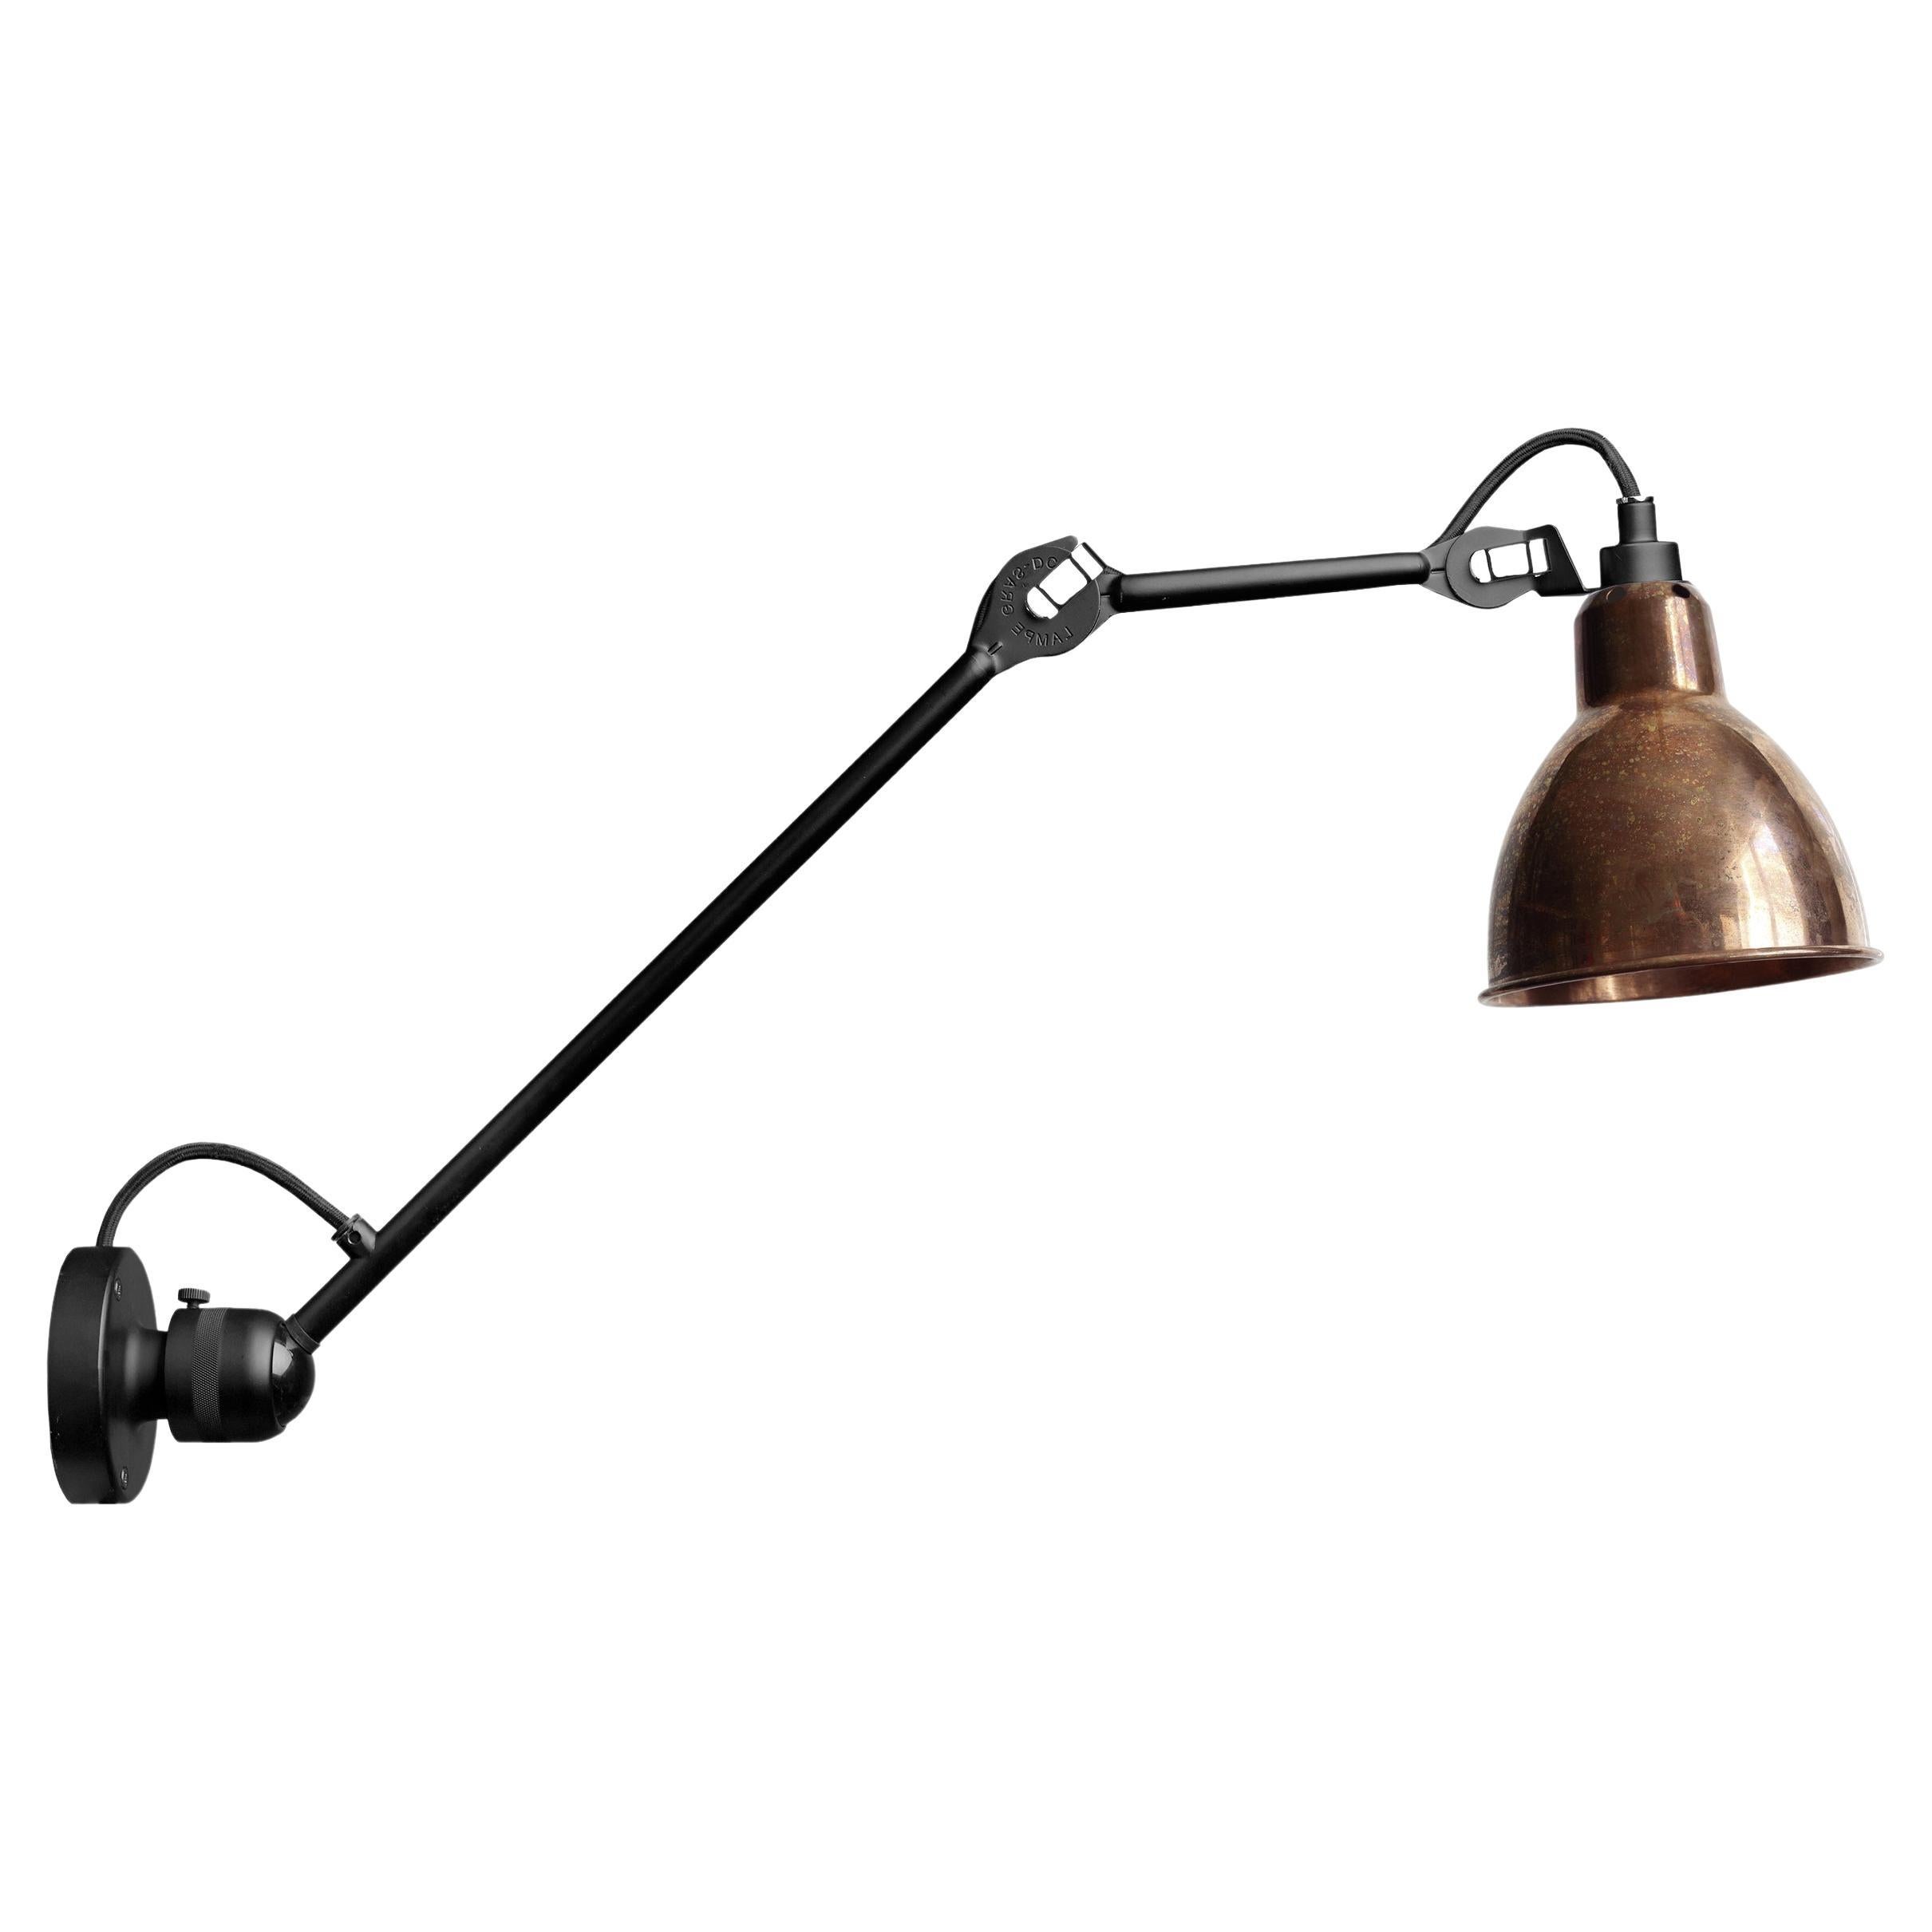 DCW Editions La Lampe Gras N°304 L40 Wall Lamp in Black Arm and Raw Copper Shade For Sale